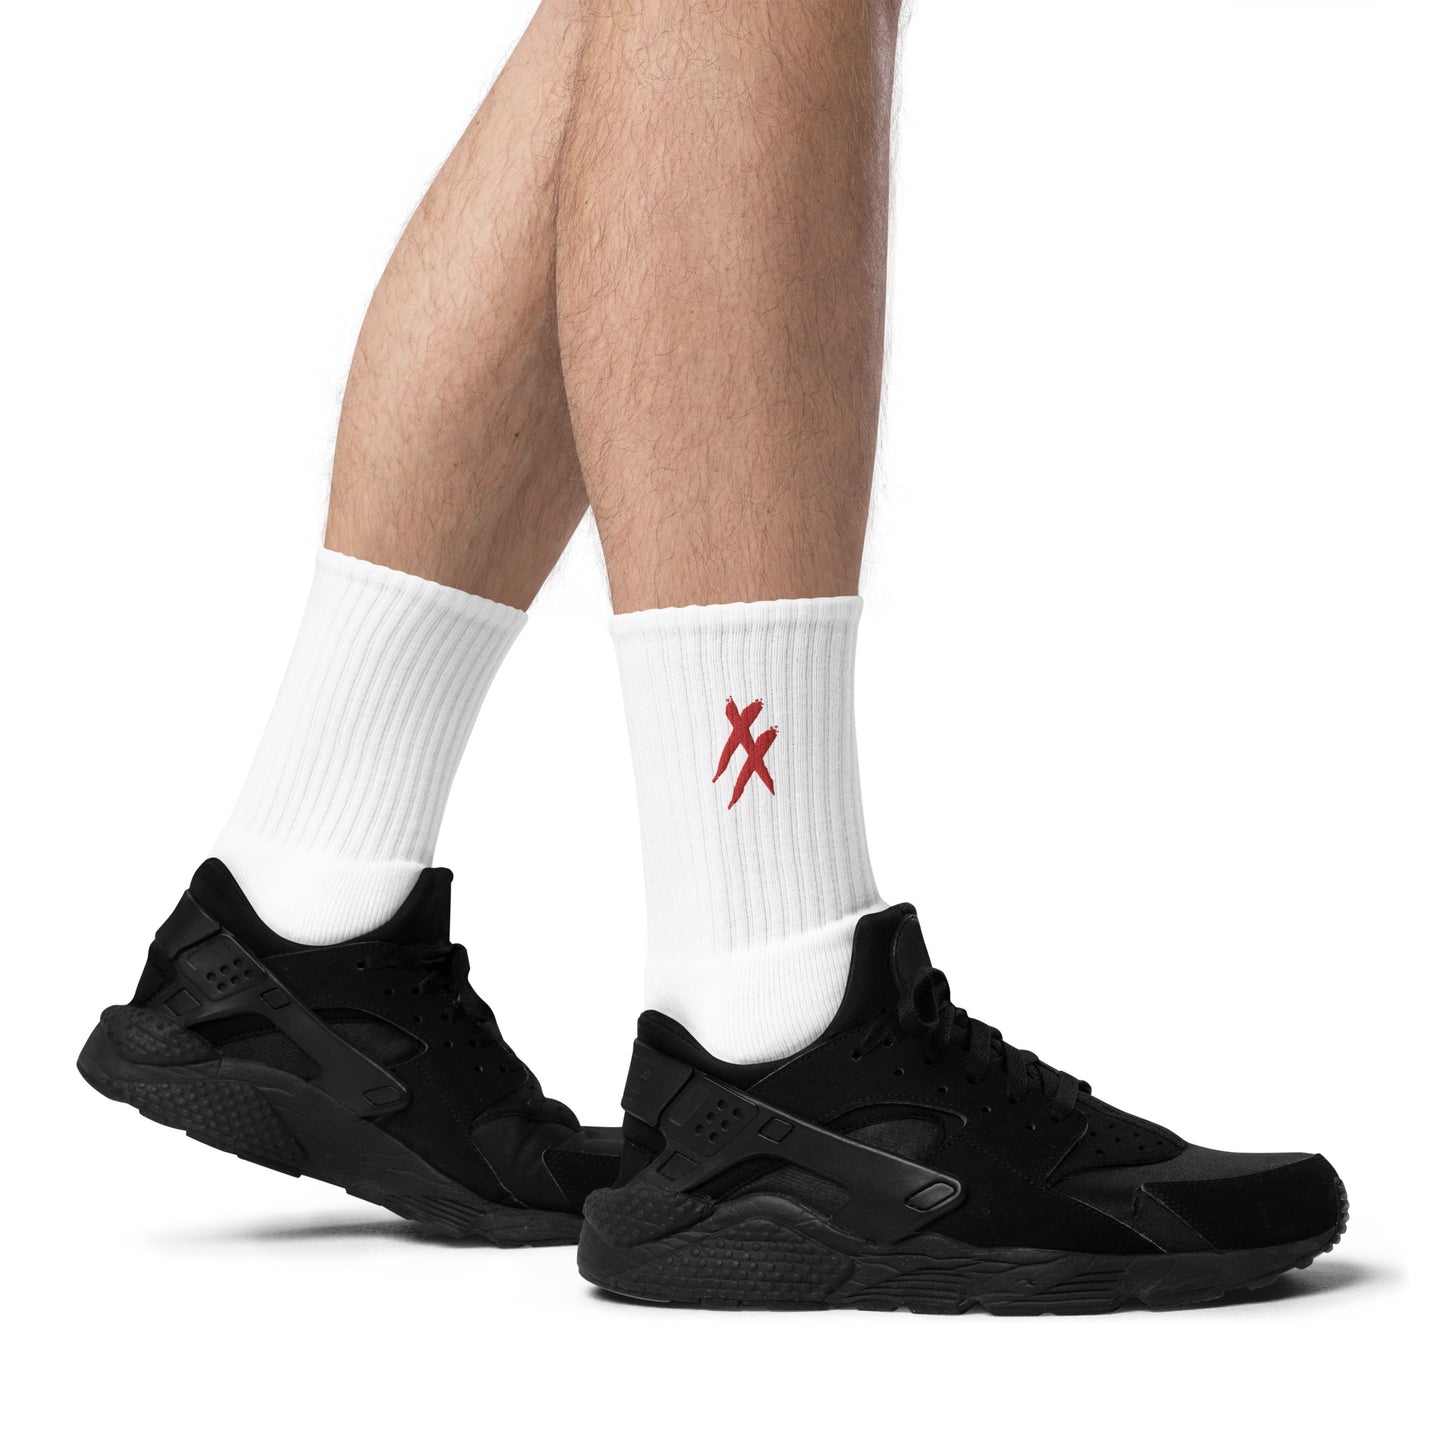 Red X's - Embroidered socks